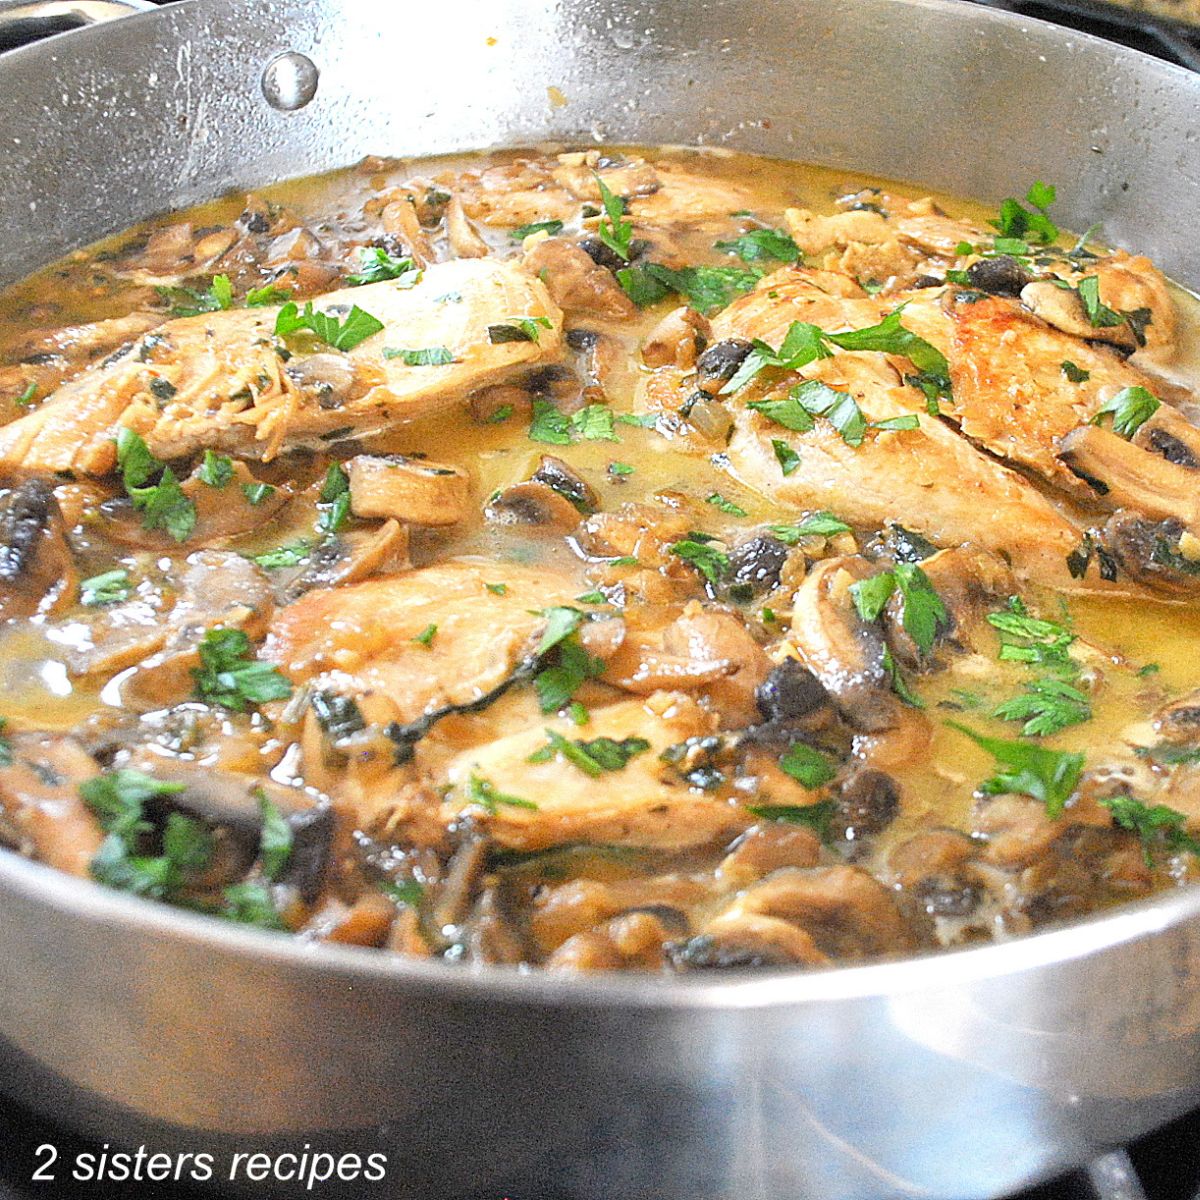 A large skillet filled with pieces of chicken, sauce and fresh parsley scattered on top